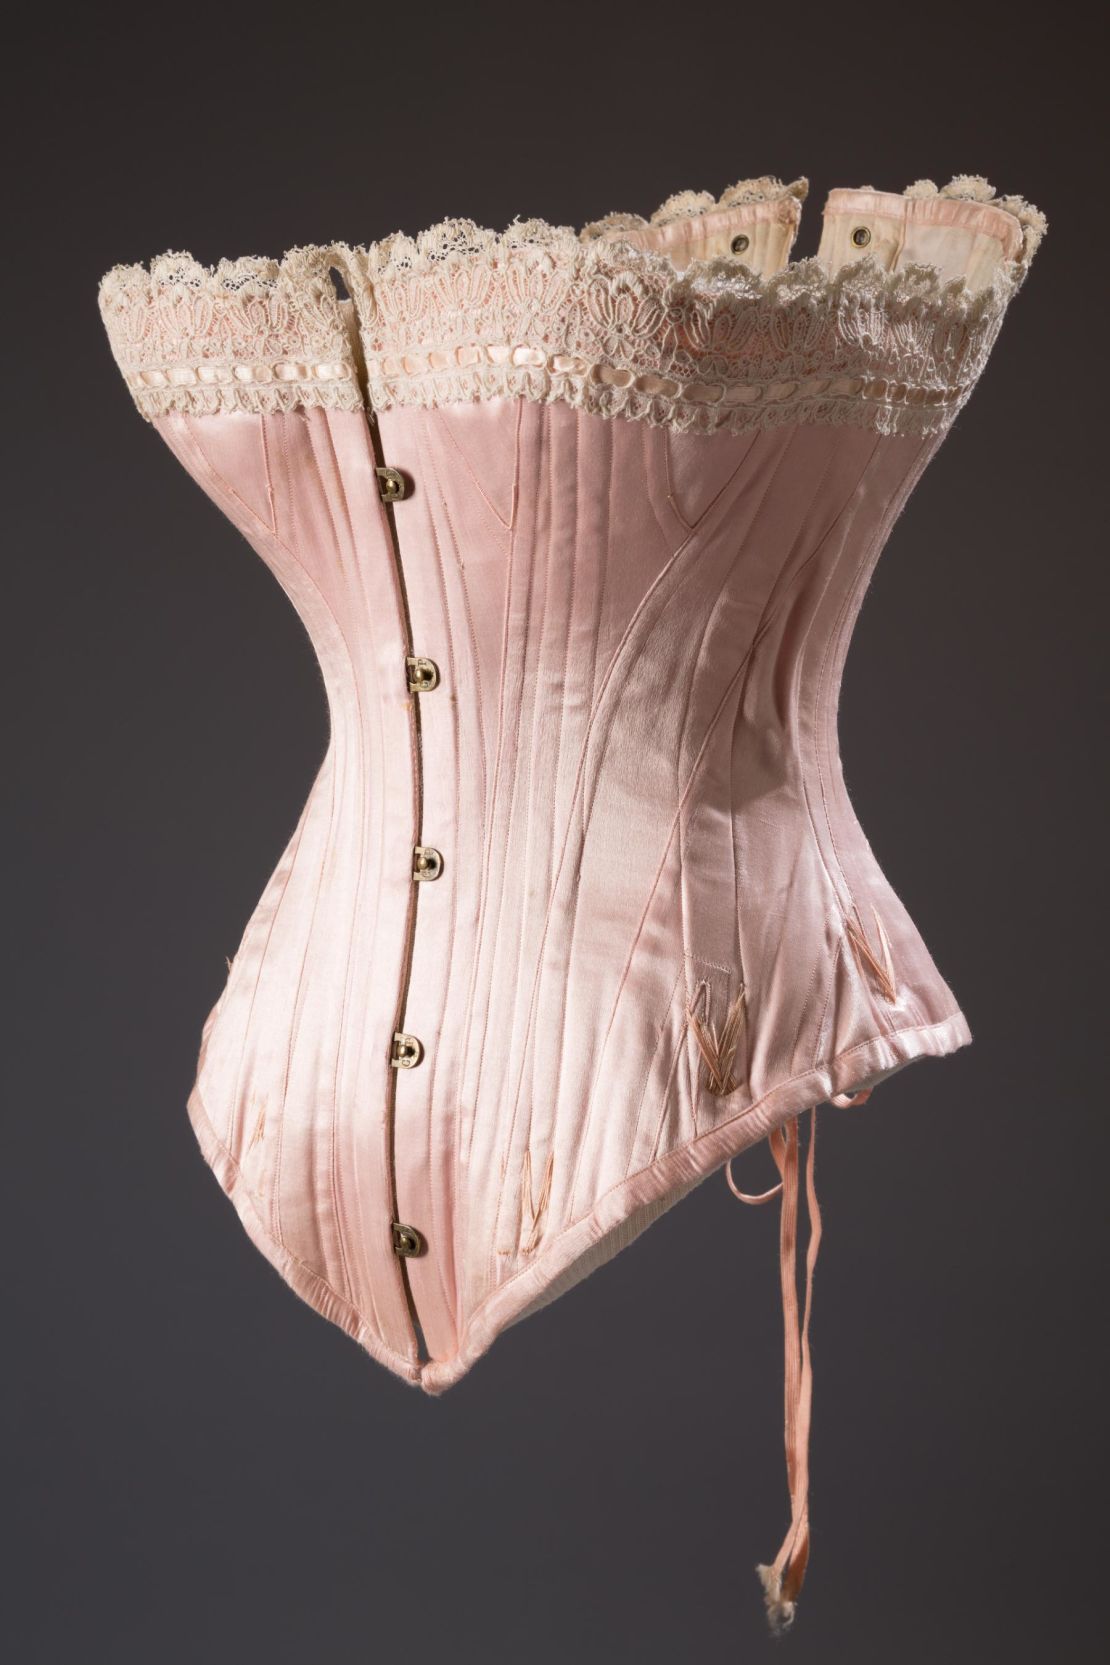 A pink corset dating back to 1880s America.